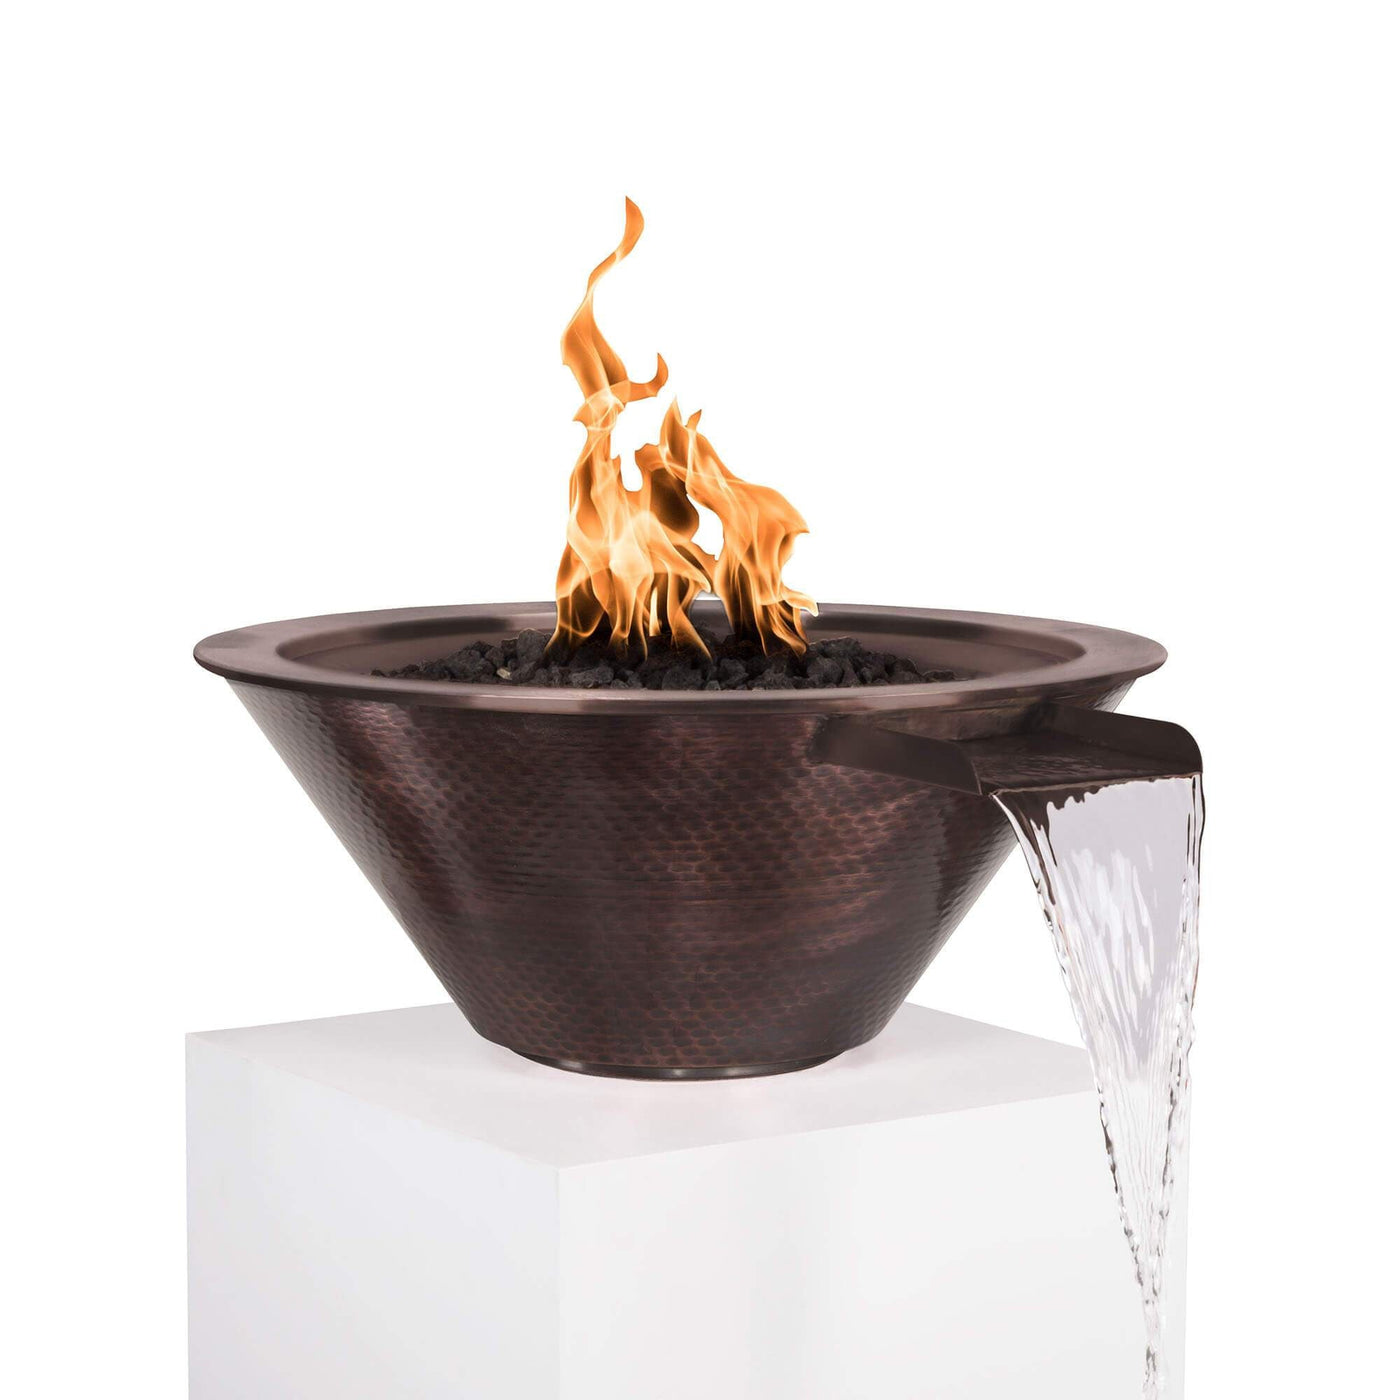 The Outdoor Plus Cazo Copper Fire & Water Bowl with flame on a white background